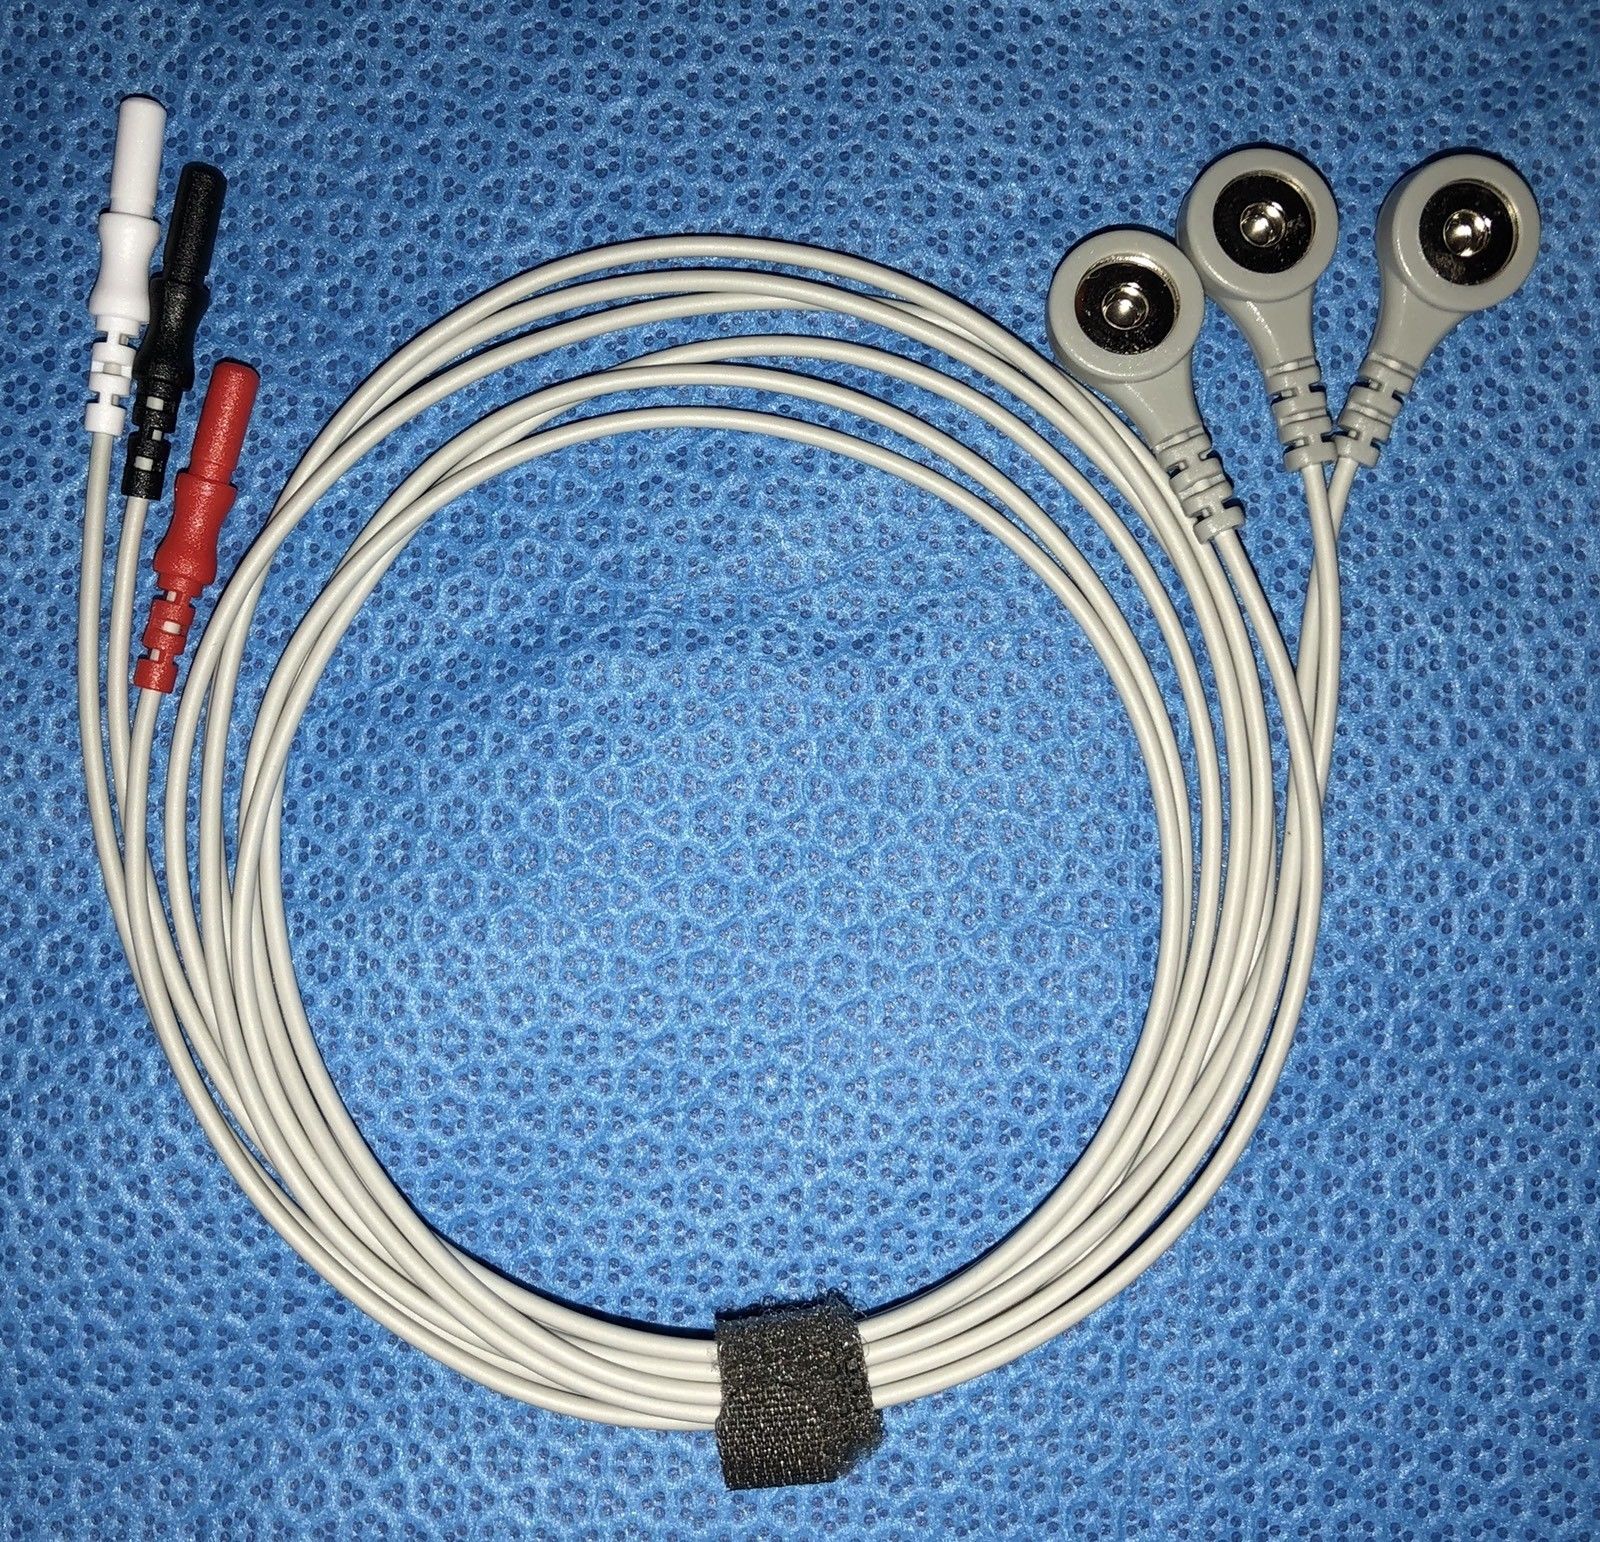 ECG Leadwire Holter Recorder 3 Leads Snap - Same Day Shipping - US Located DIAGNOSTIC ULTRASOUND MACHINES FOR SALE